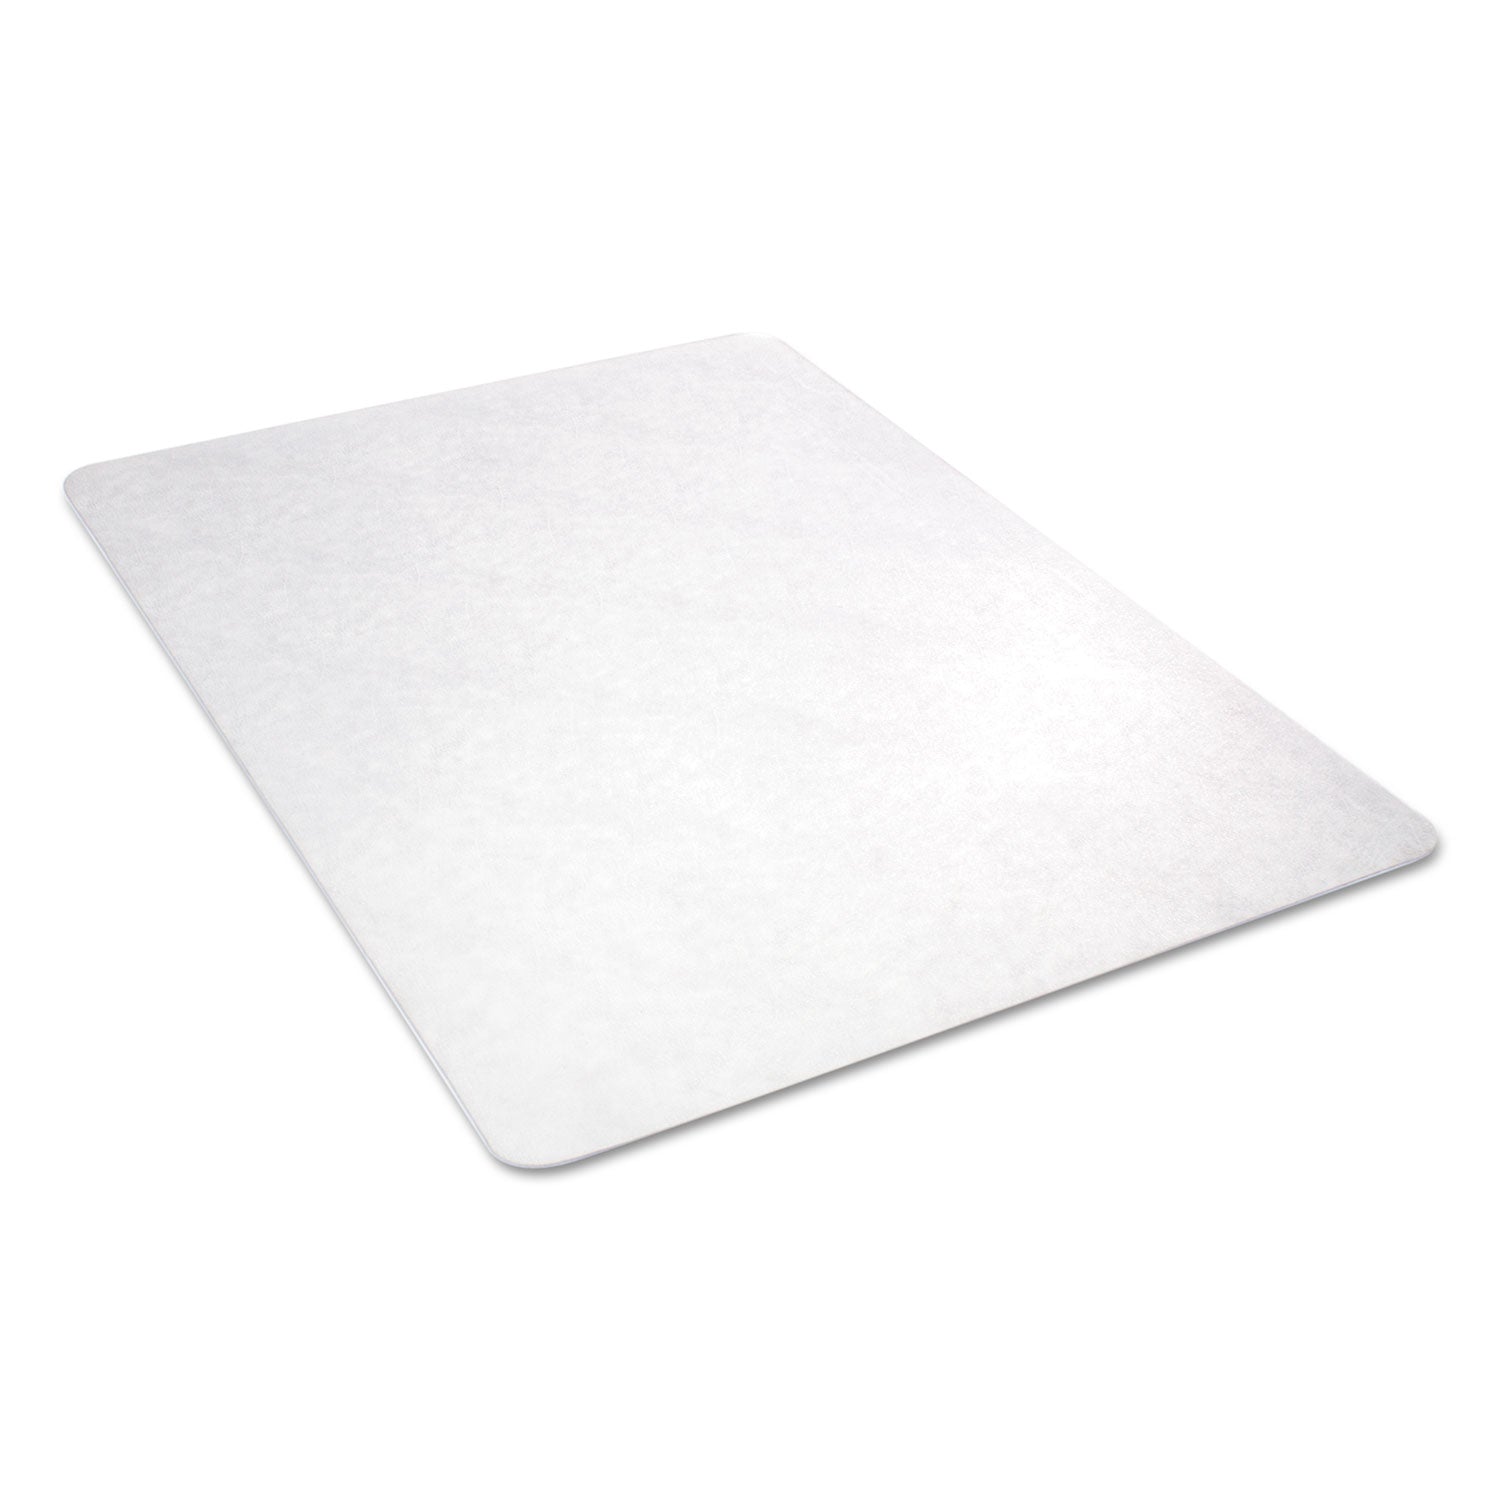 economat-all-day-use-chair-mat-for-hard-floors-rolled-packed-45-x-53-clear_defcm21242com - 6